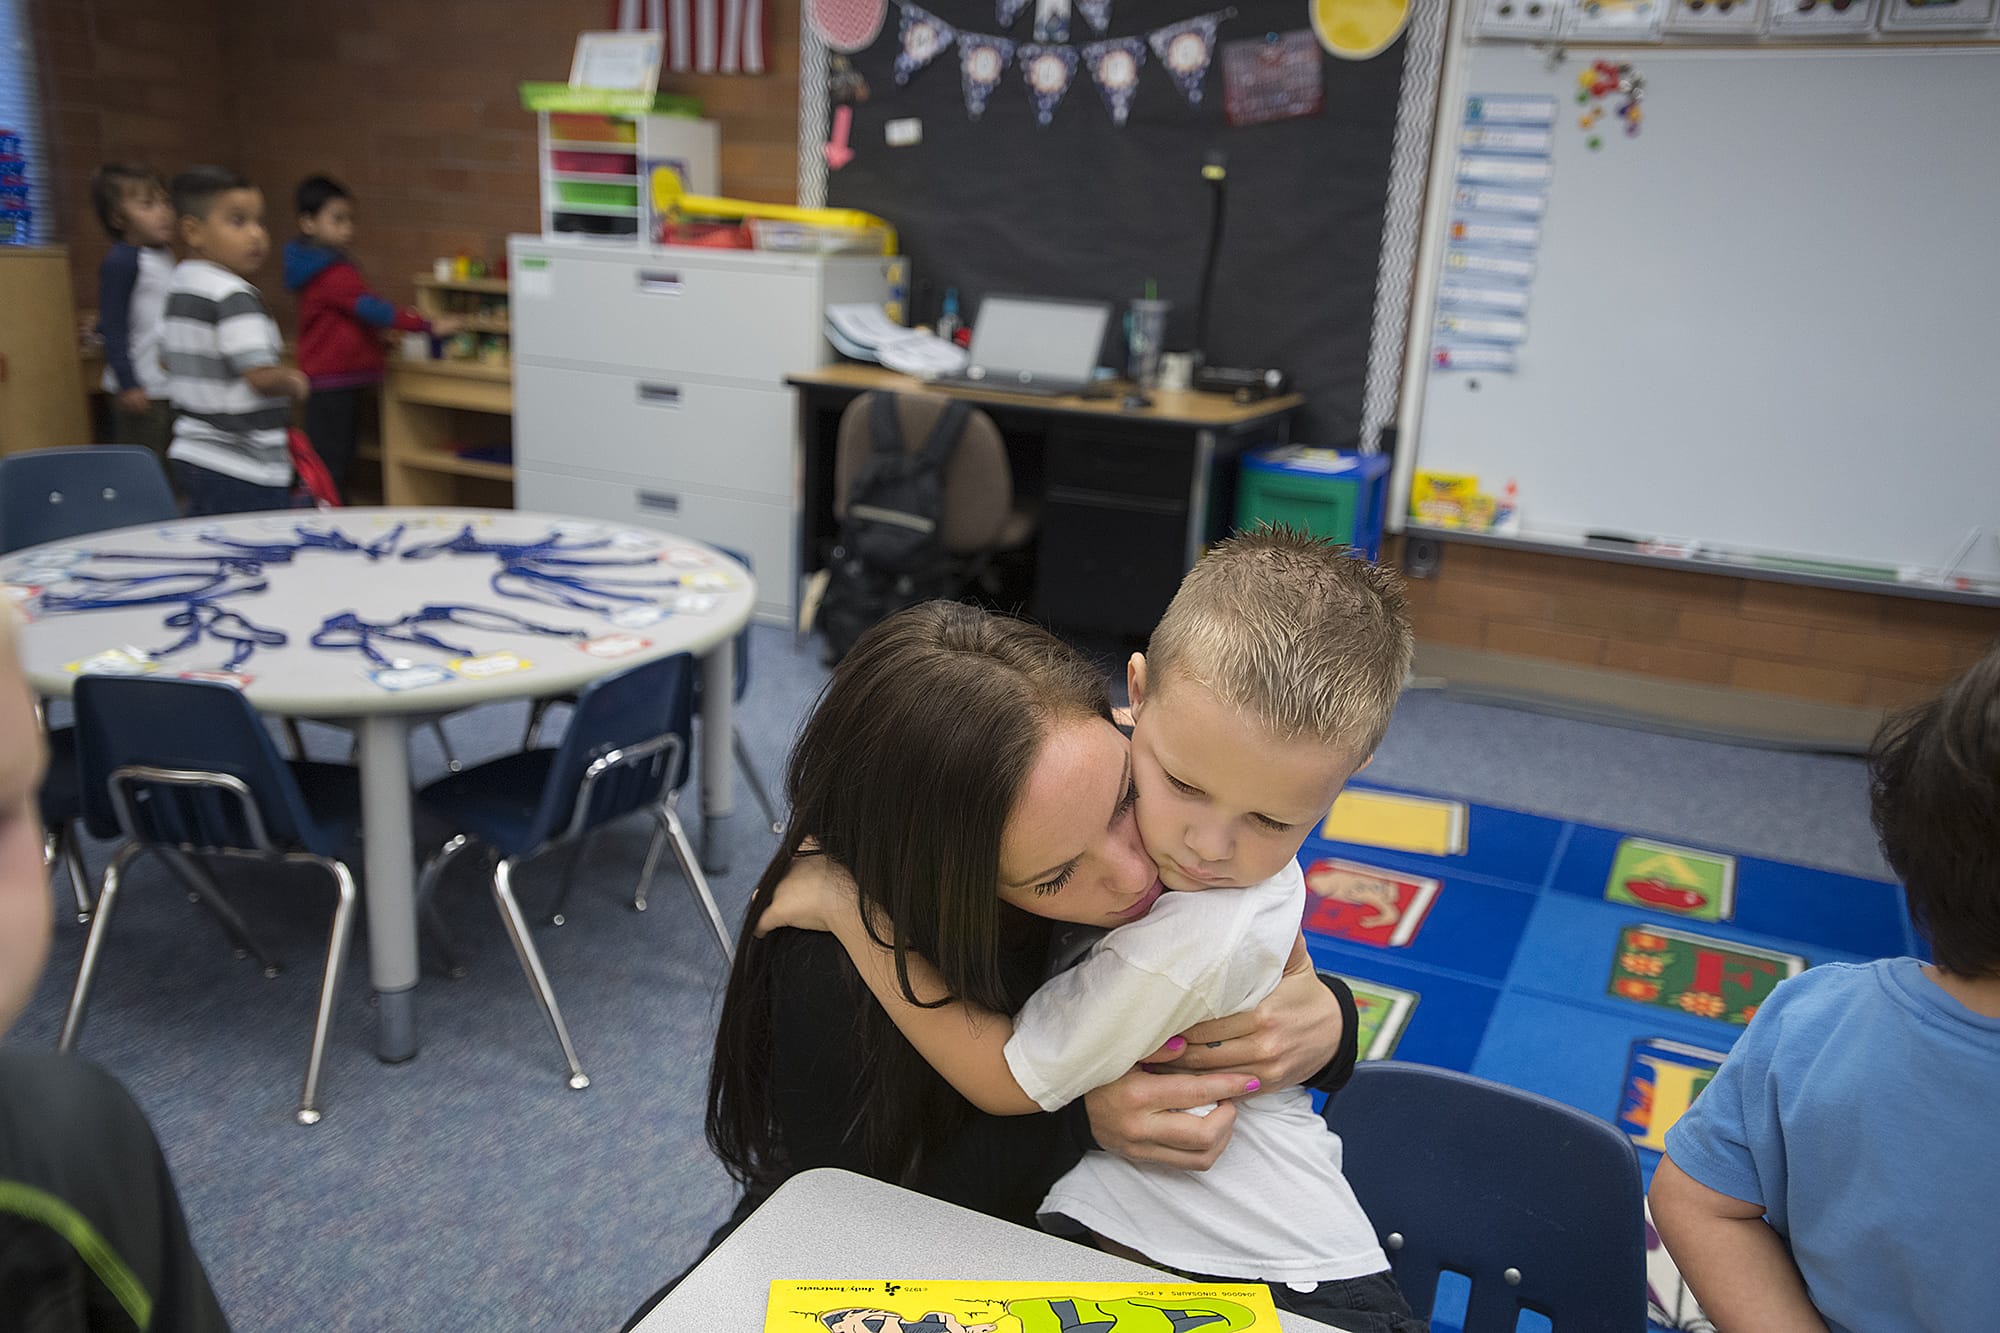 Katie Akerill shares a goodbye hug with her son, Wade, 5, during his first day of kindergarten at Ogden Elementary School on Wednesday morning, Sept. 5, 2018.